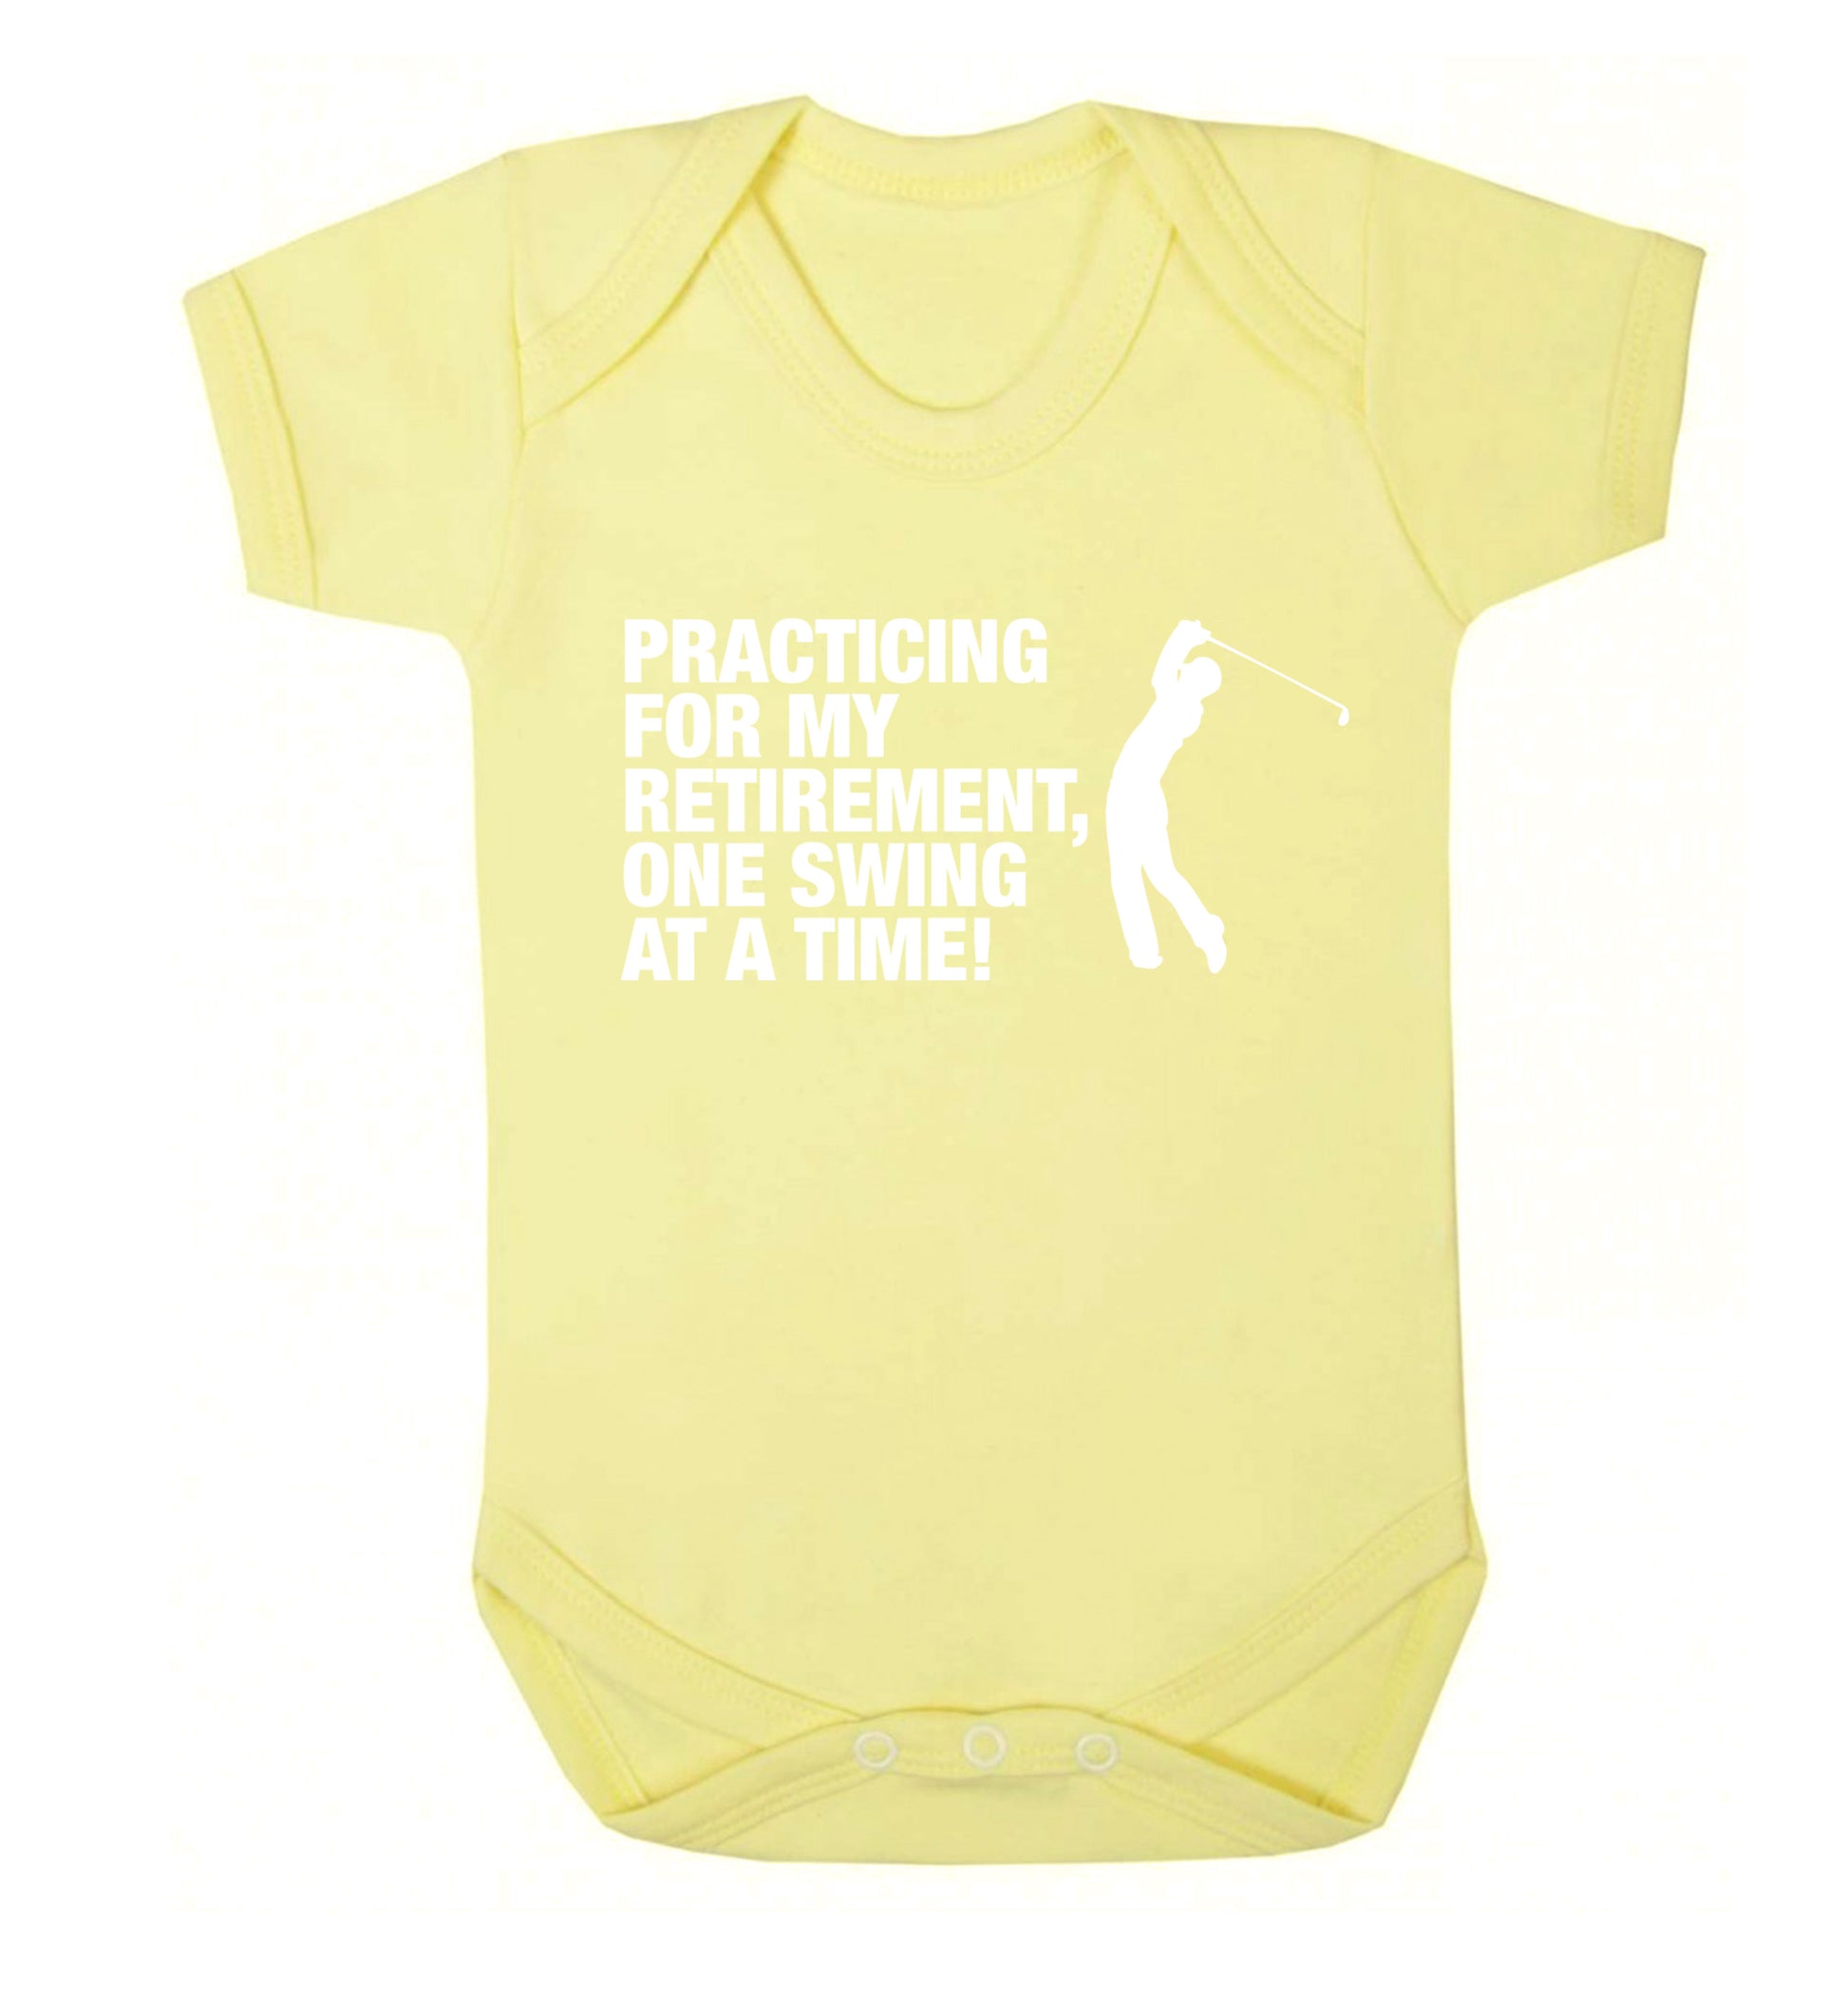 Practicing for my retirement one swing at a time Baby Vest pale yellow 18-24 months